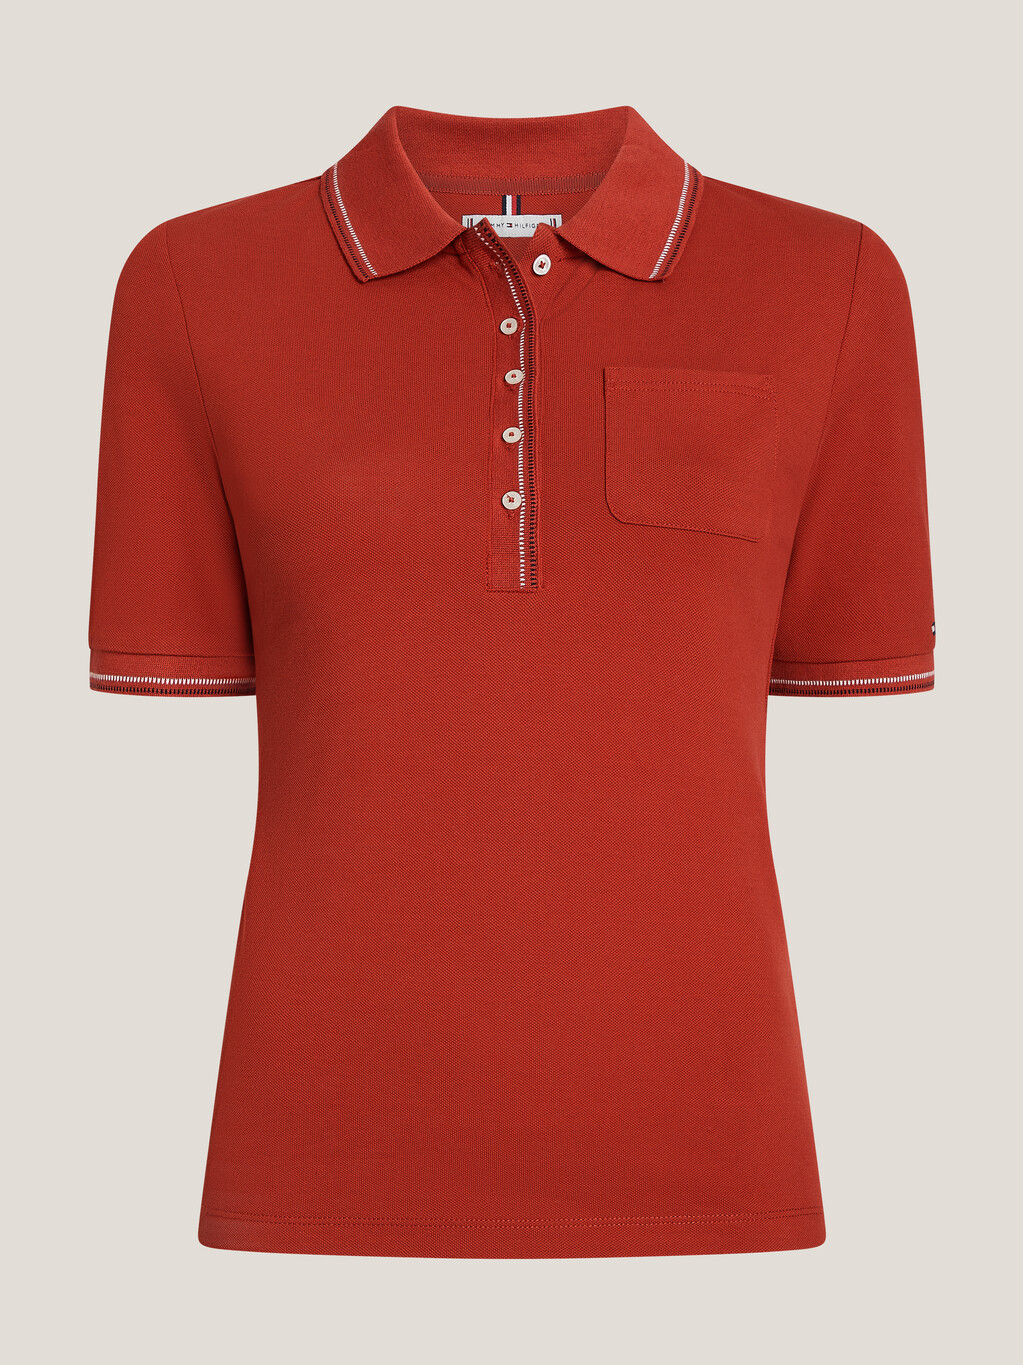 Tipped Slim Fit Patch Pocket Polo, Dark Magma, hi-res